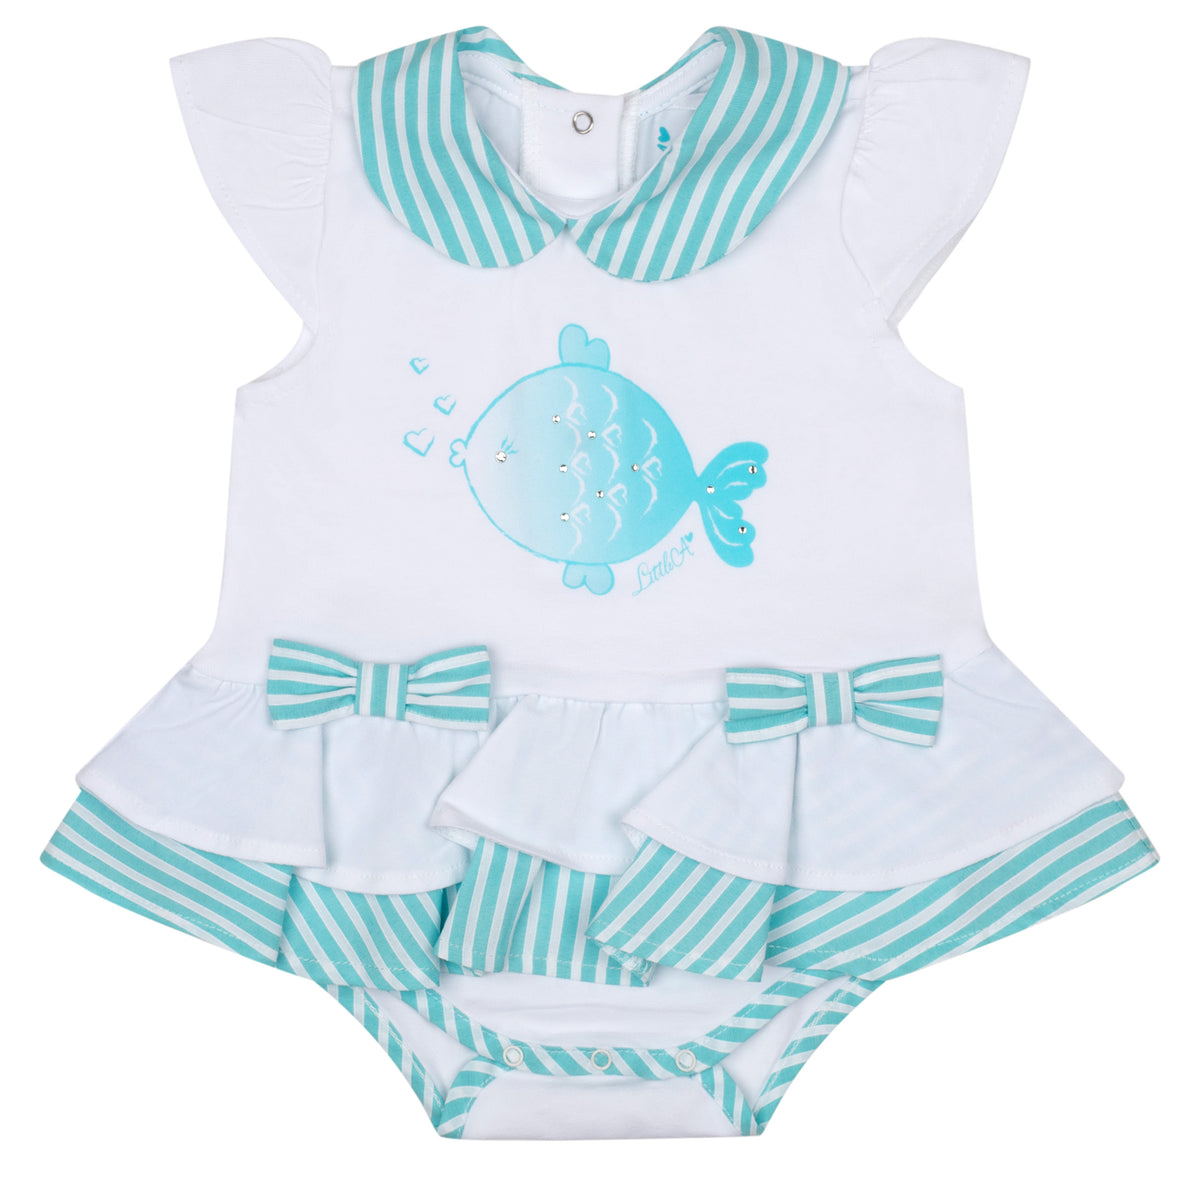 Little A Girls 'Kirsty' White Fish Romper